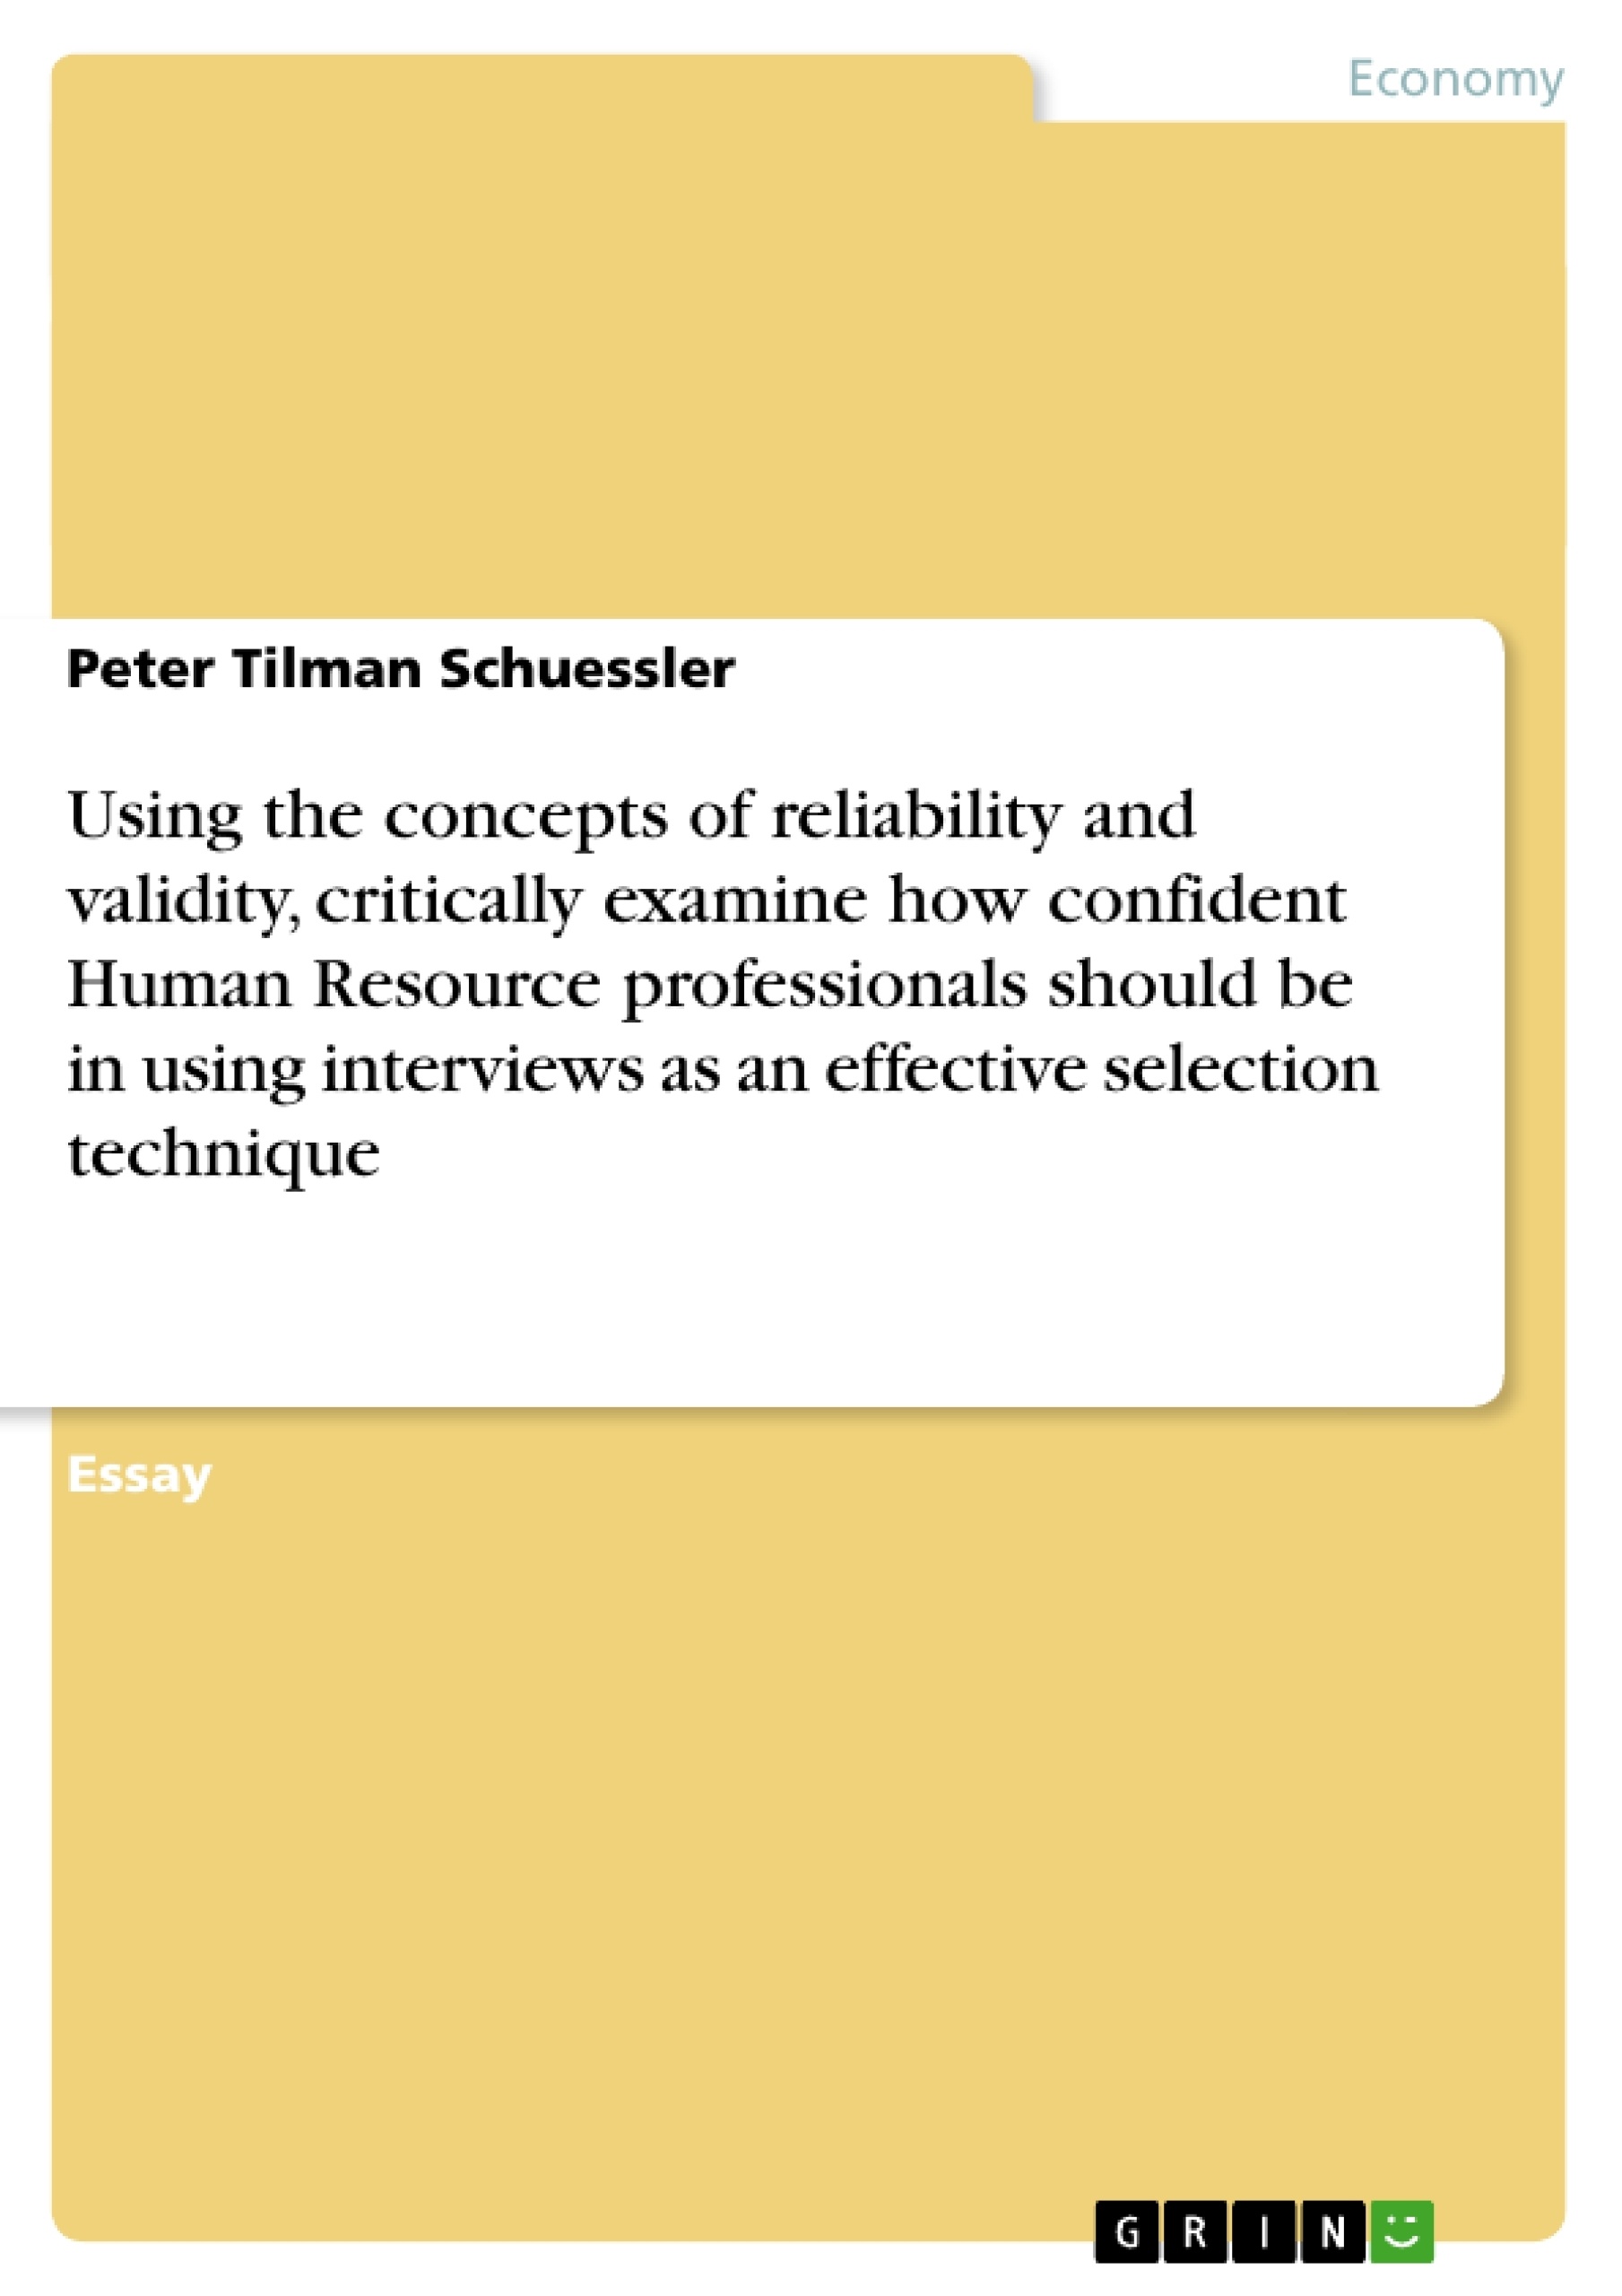 Título: Using the concepts of reliability and validity, critically examine how confident Human Resource professionals should be in using interviews as an effective selection technique